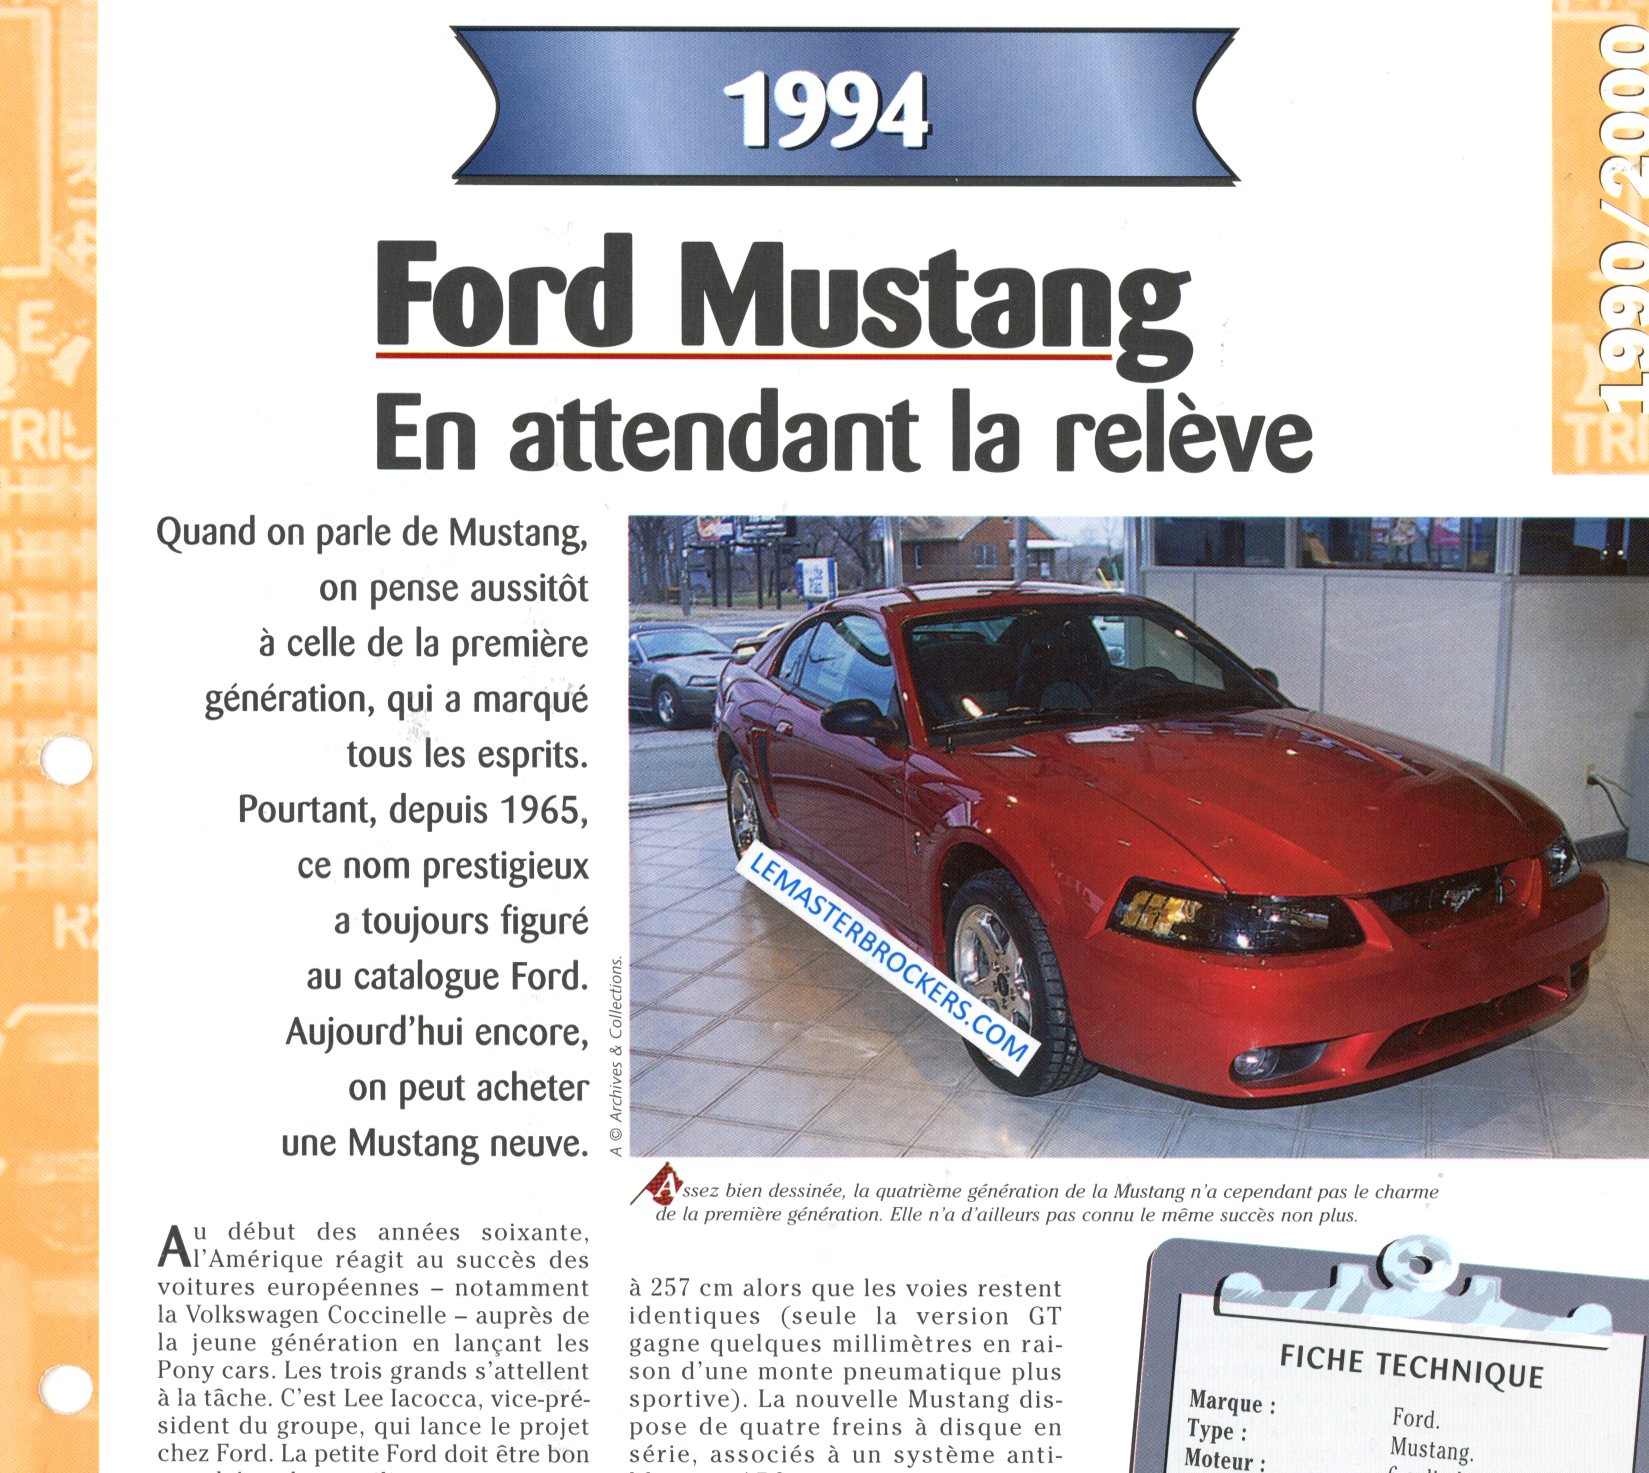 FORD MUSTANG 1994 FICHE TECHNIQUE